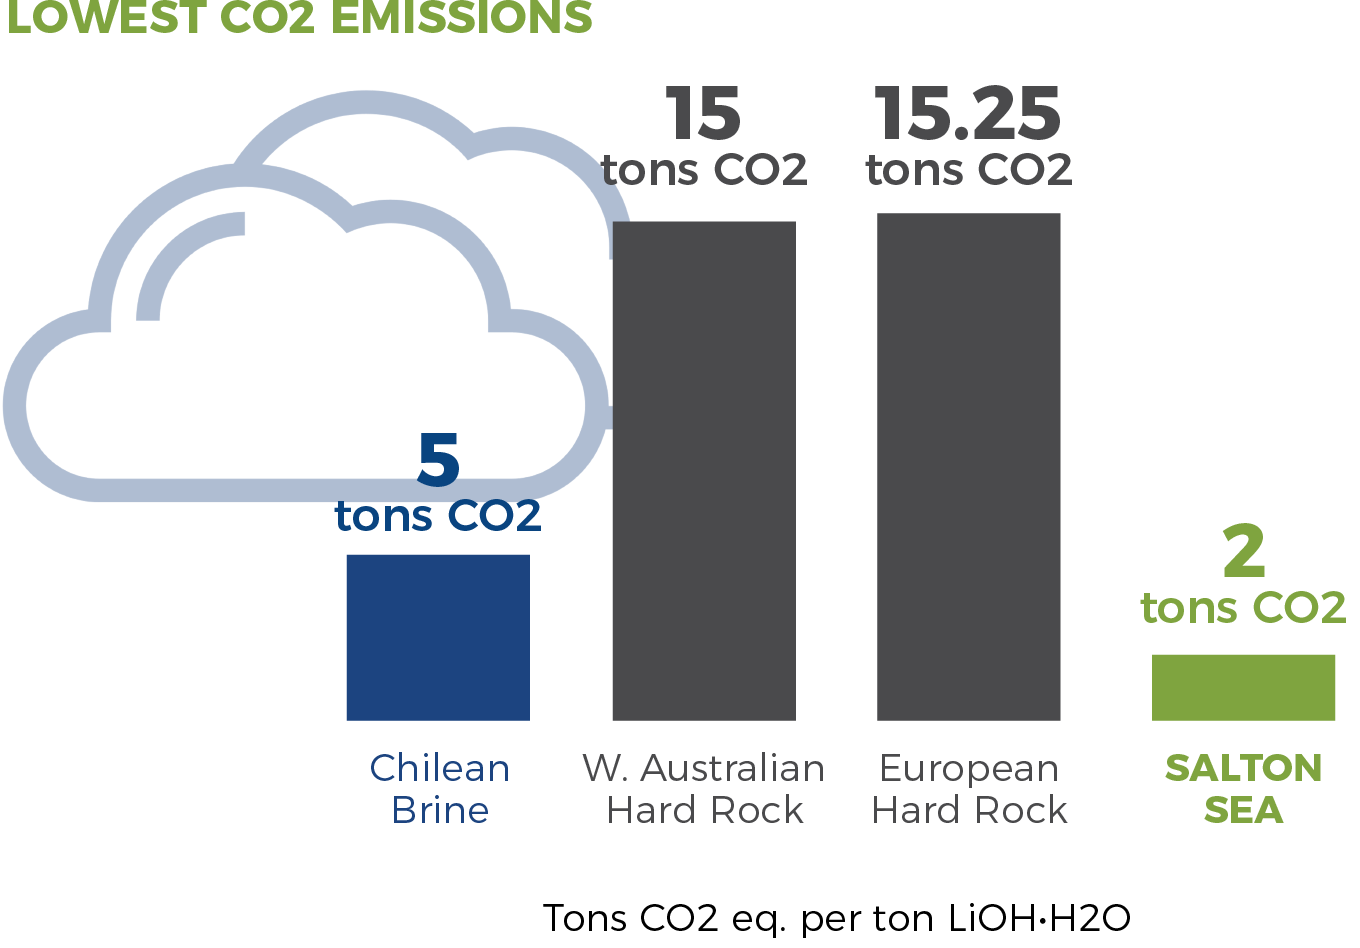 Lowest CO2 Emissions